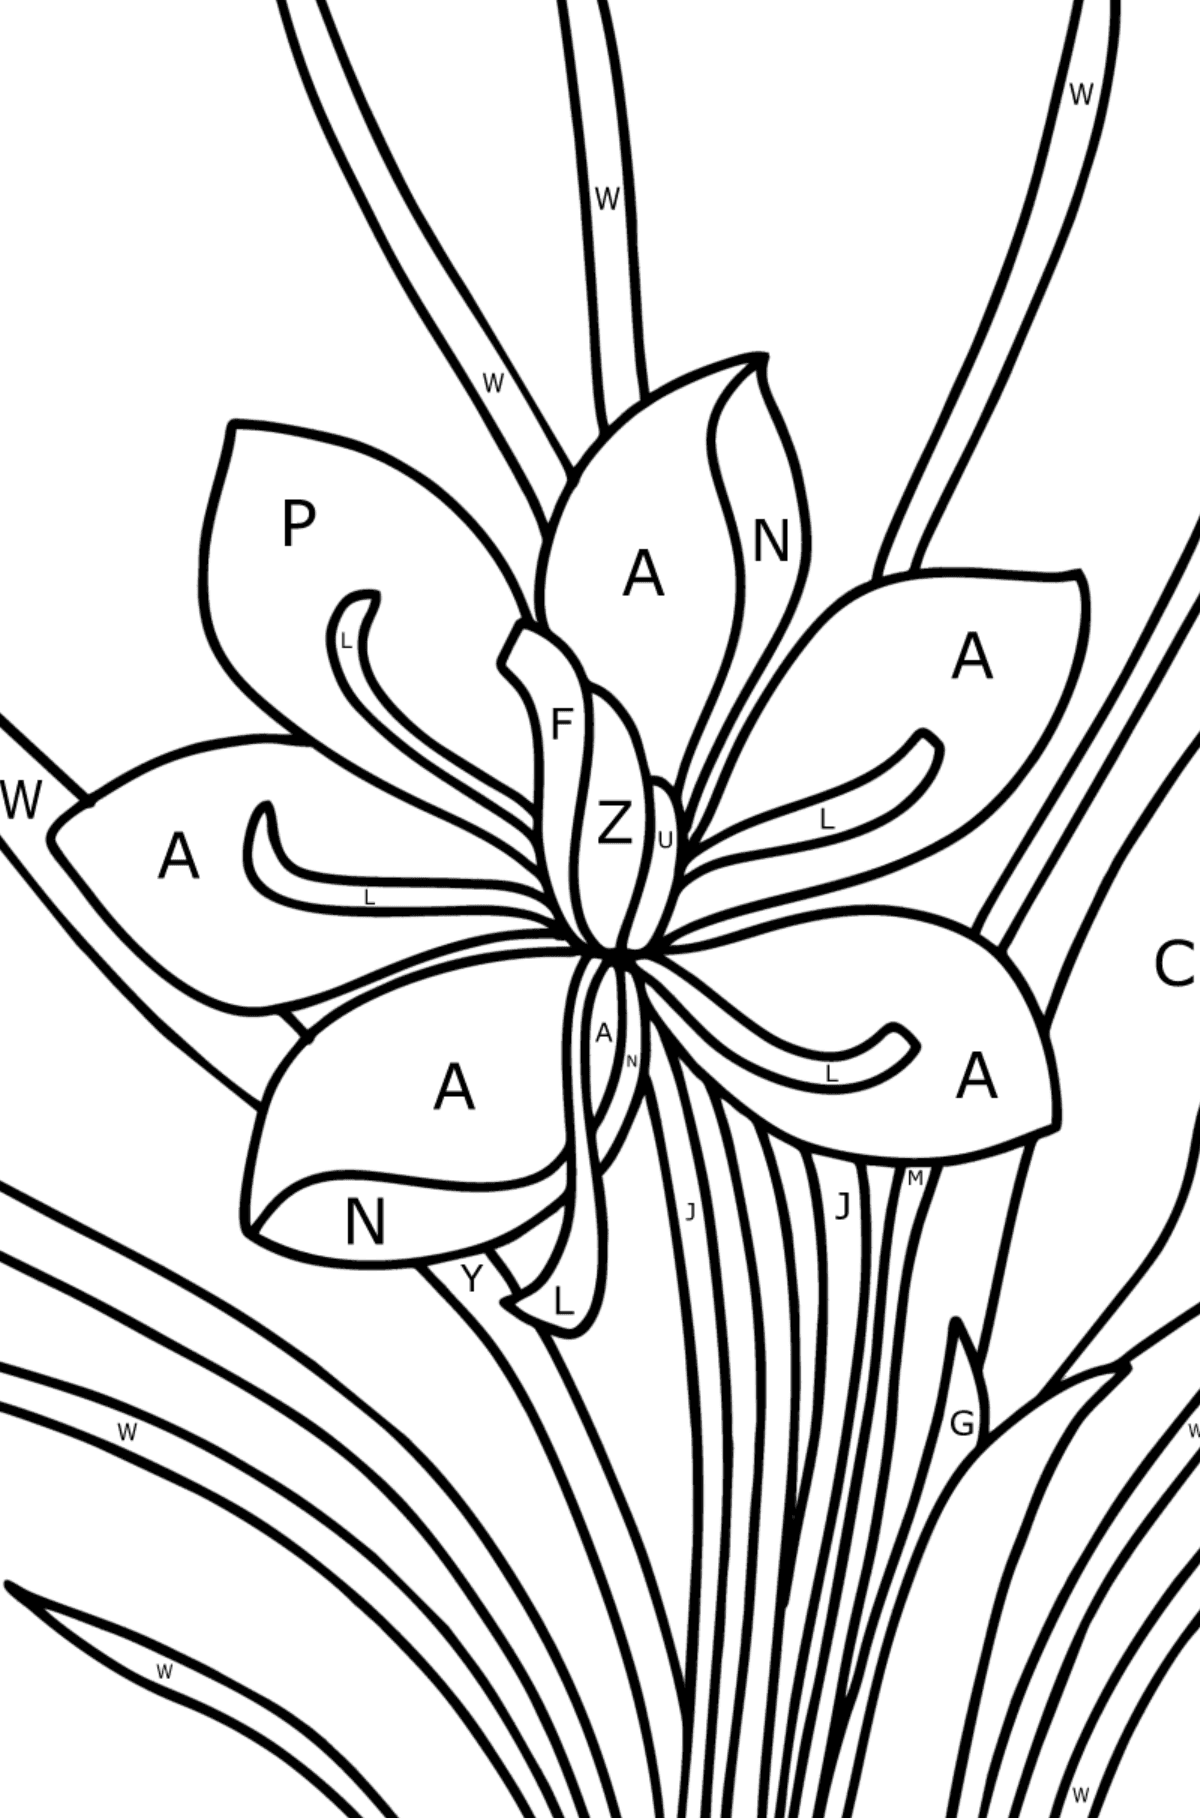 Crocus coloring page - Coloring by Letters for Kids